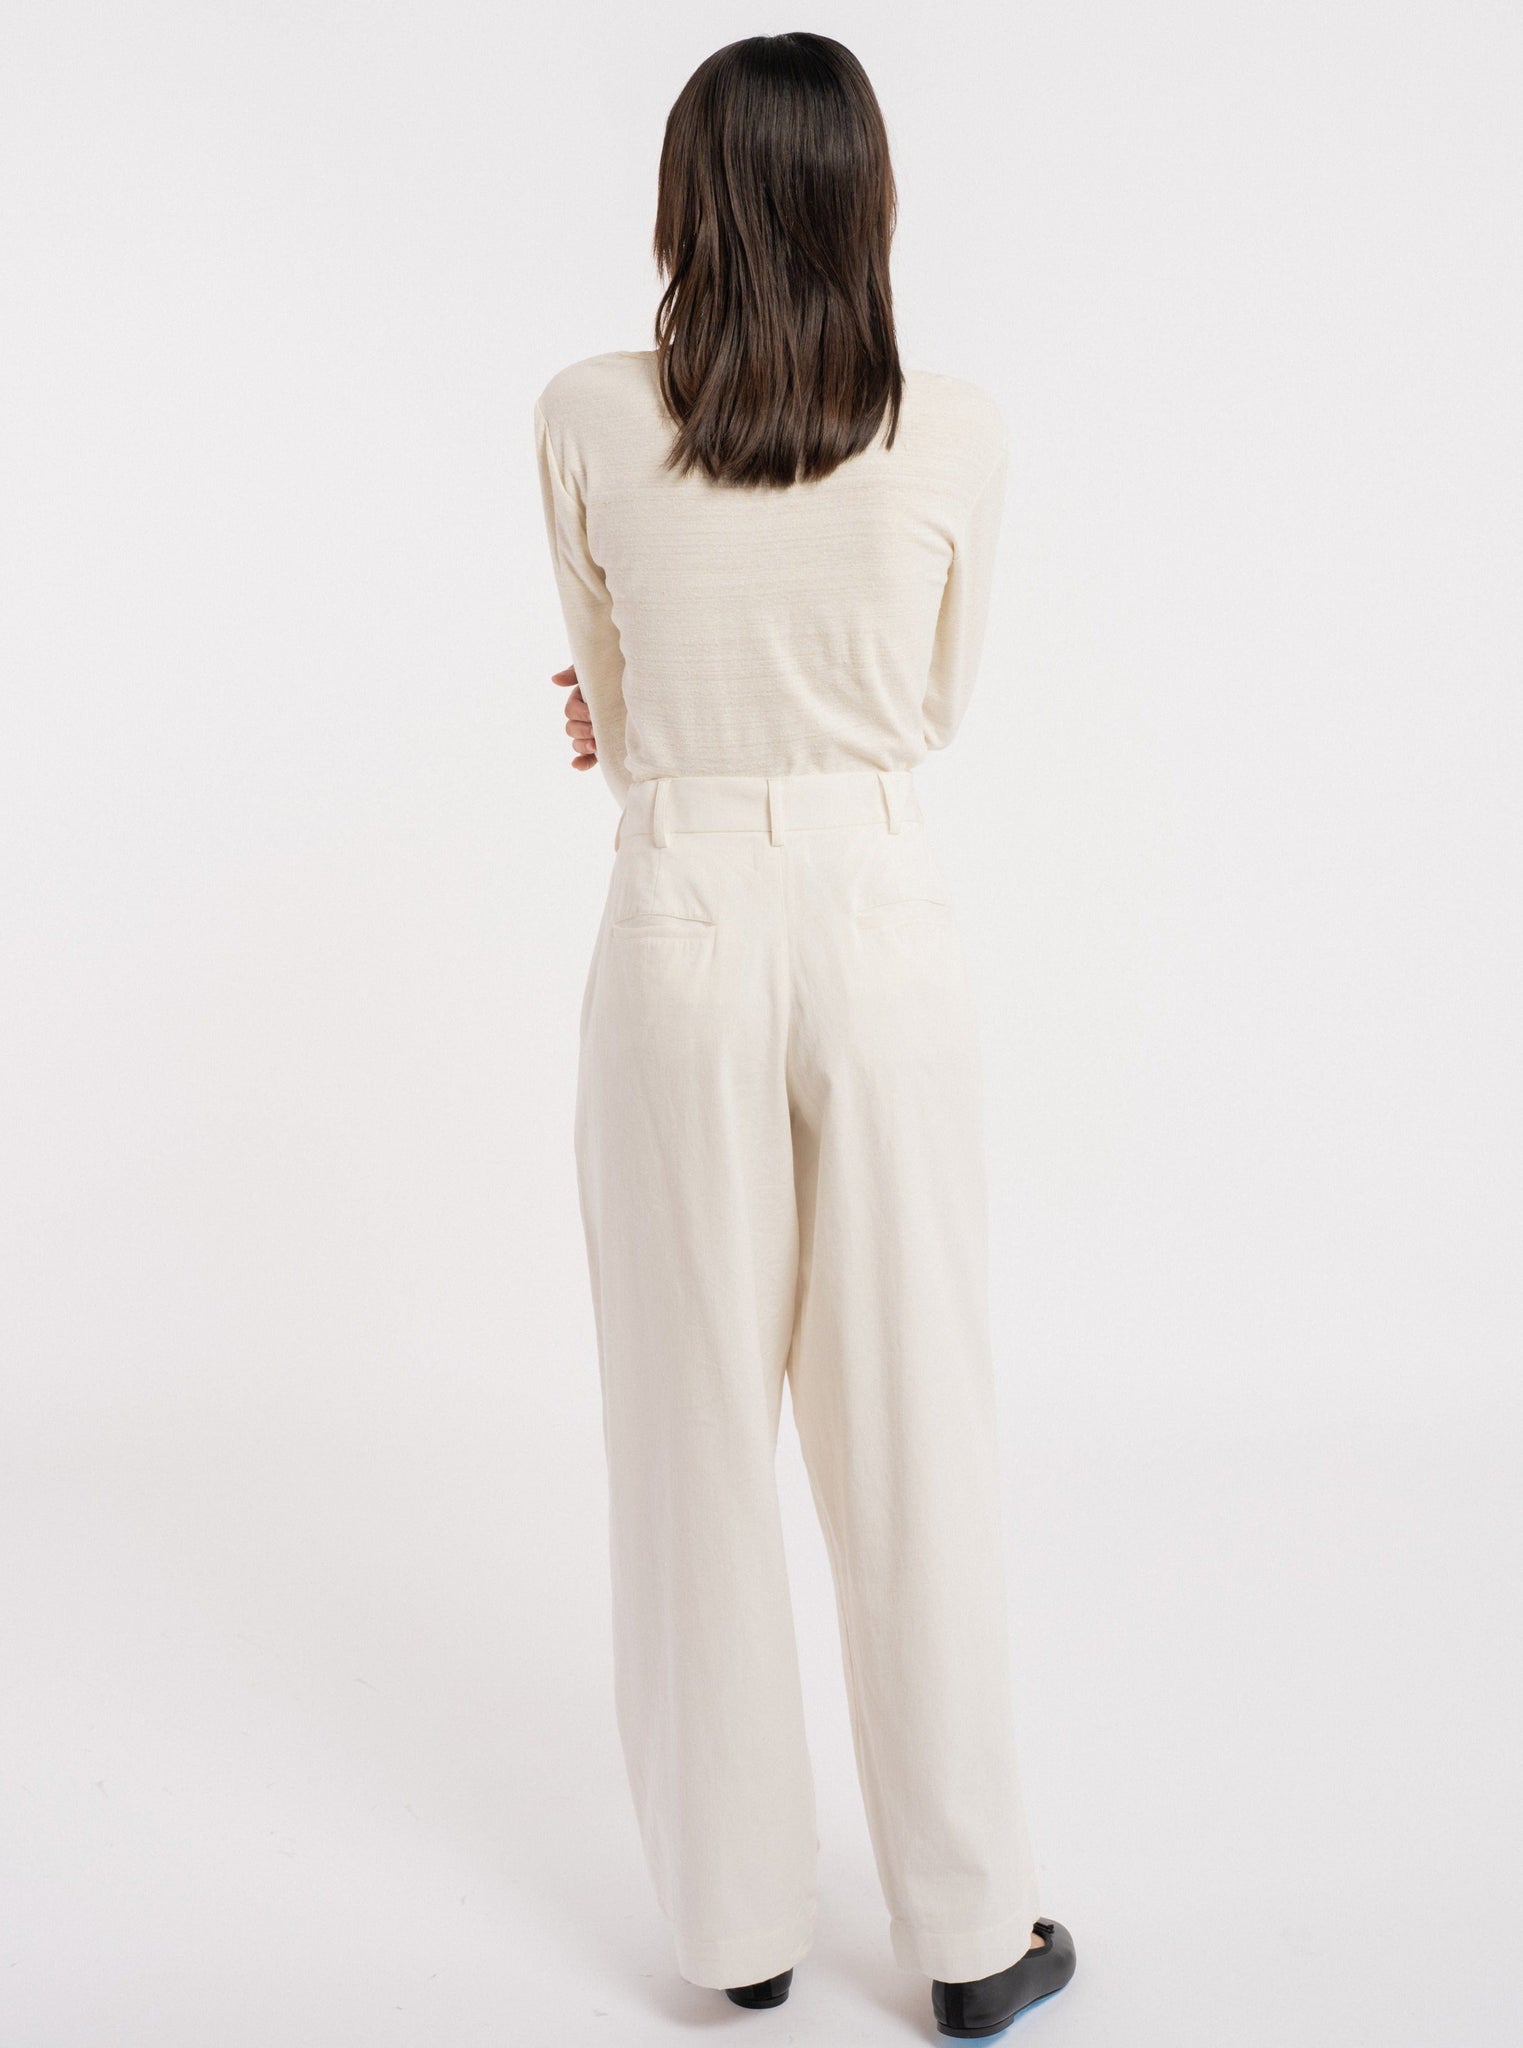 The back view of a woman wearing cream wide leg pants with a Scoop Neck Tee - Ivory.